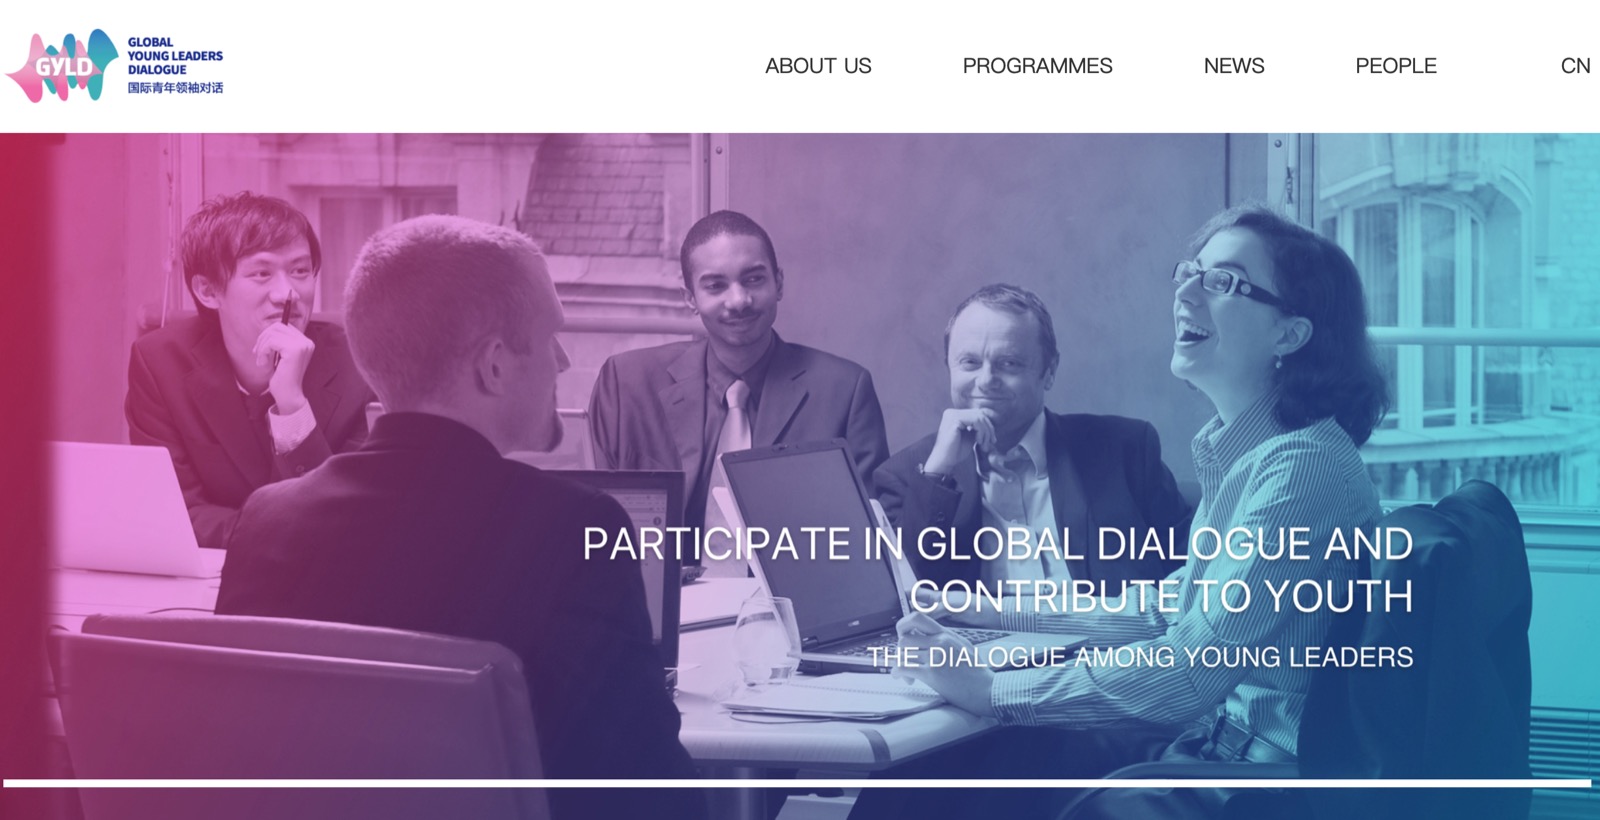 Website launched for Global Young Leaders Dialogue